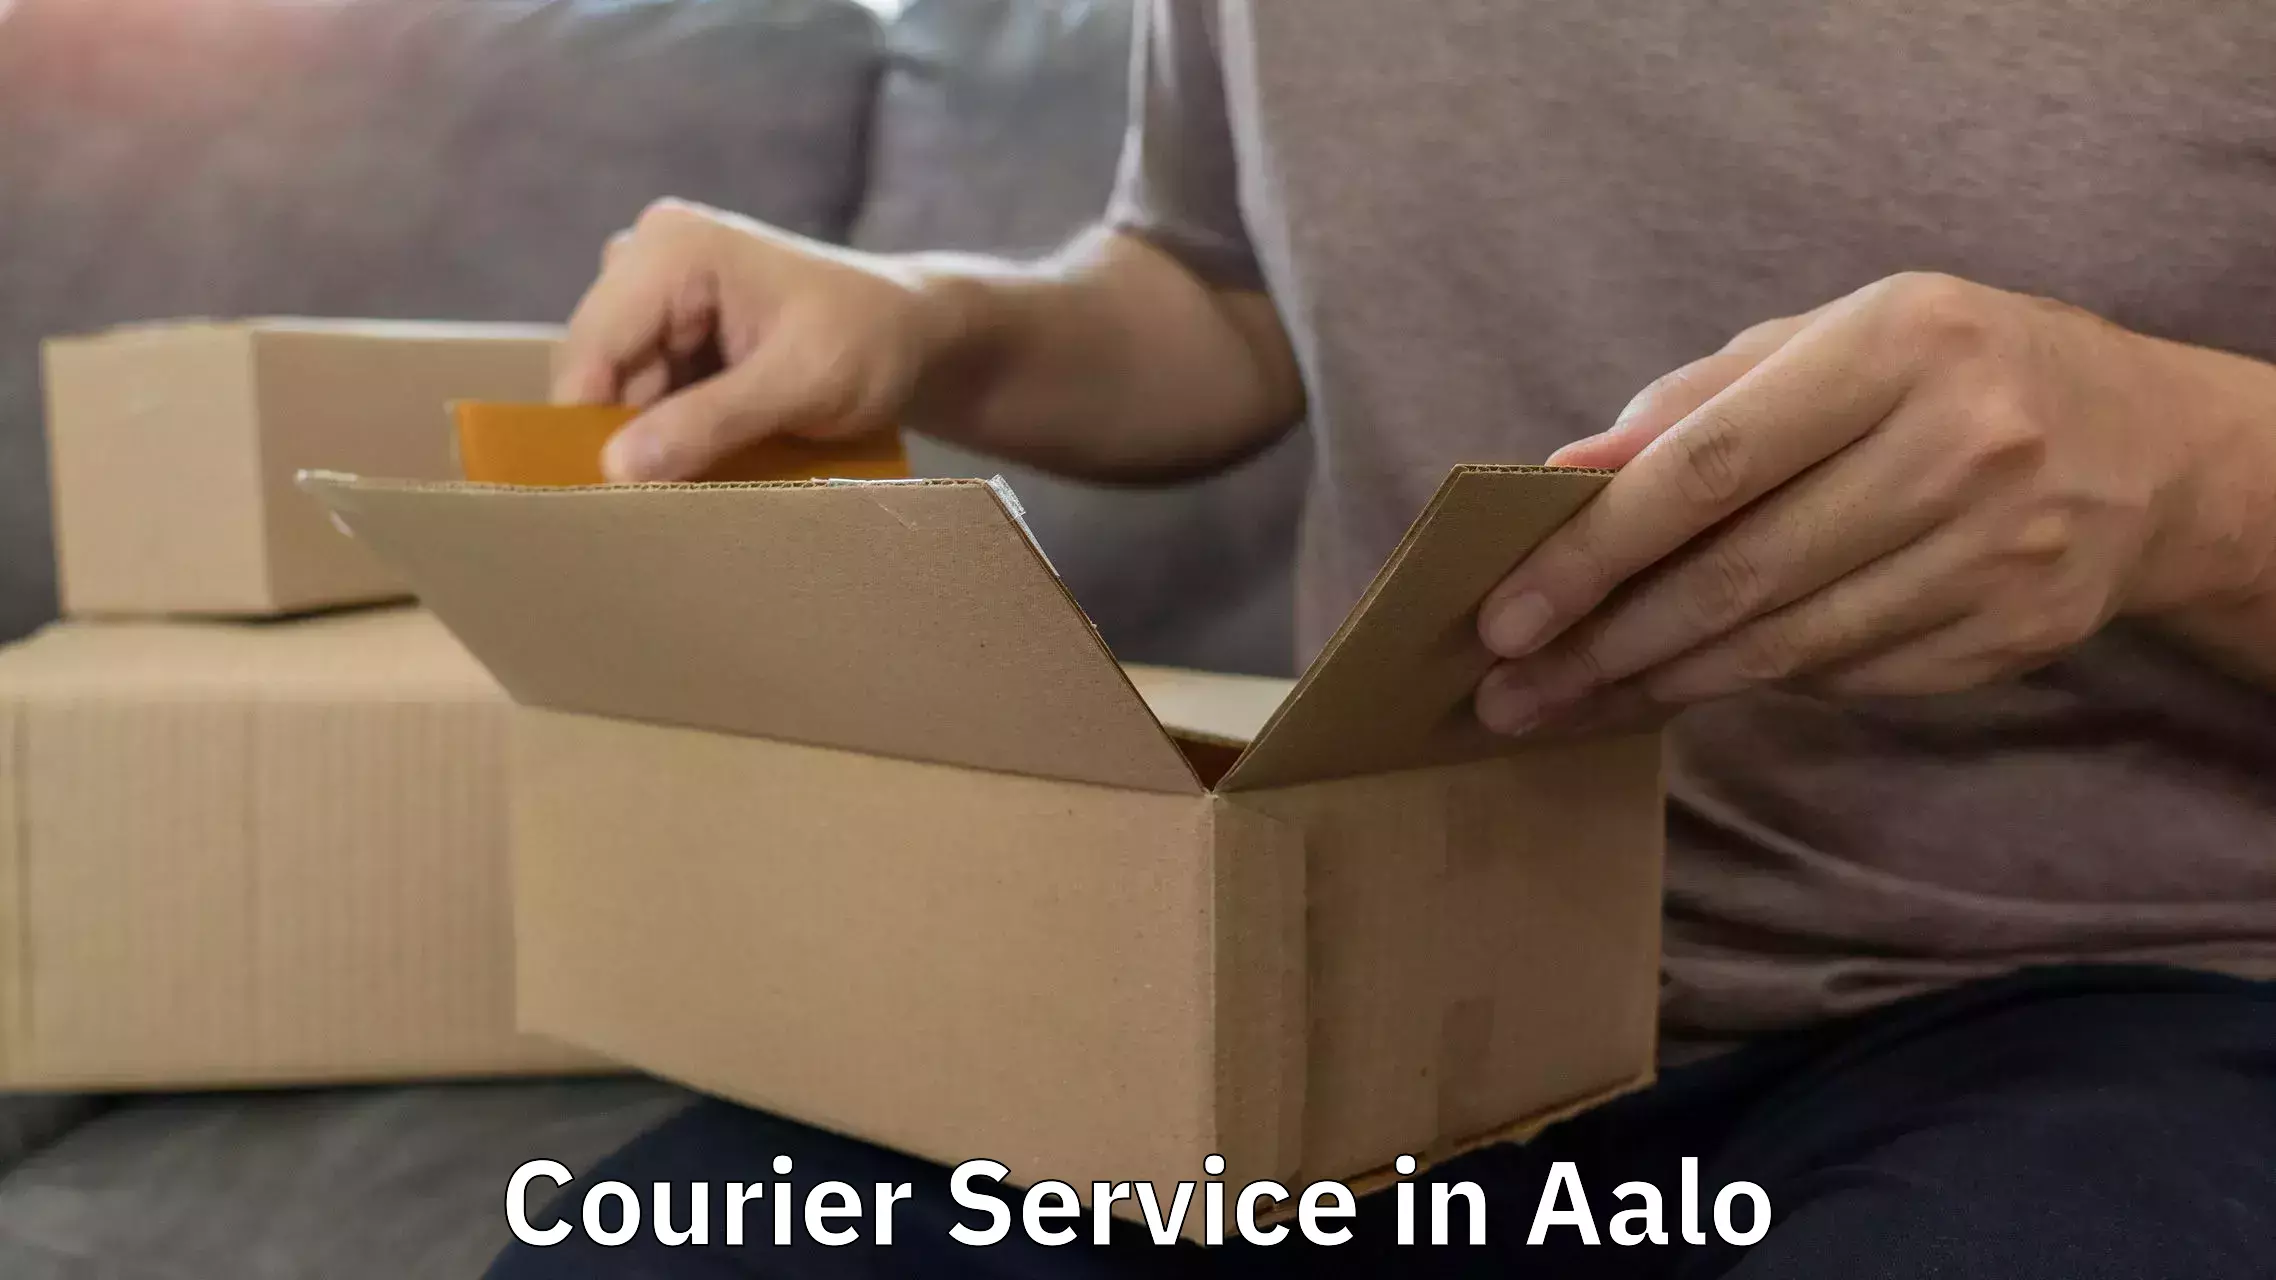 Cash on delivery service in Aalo